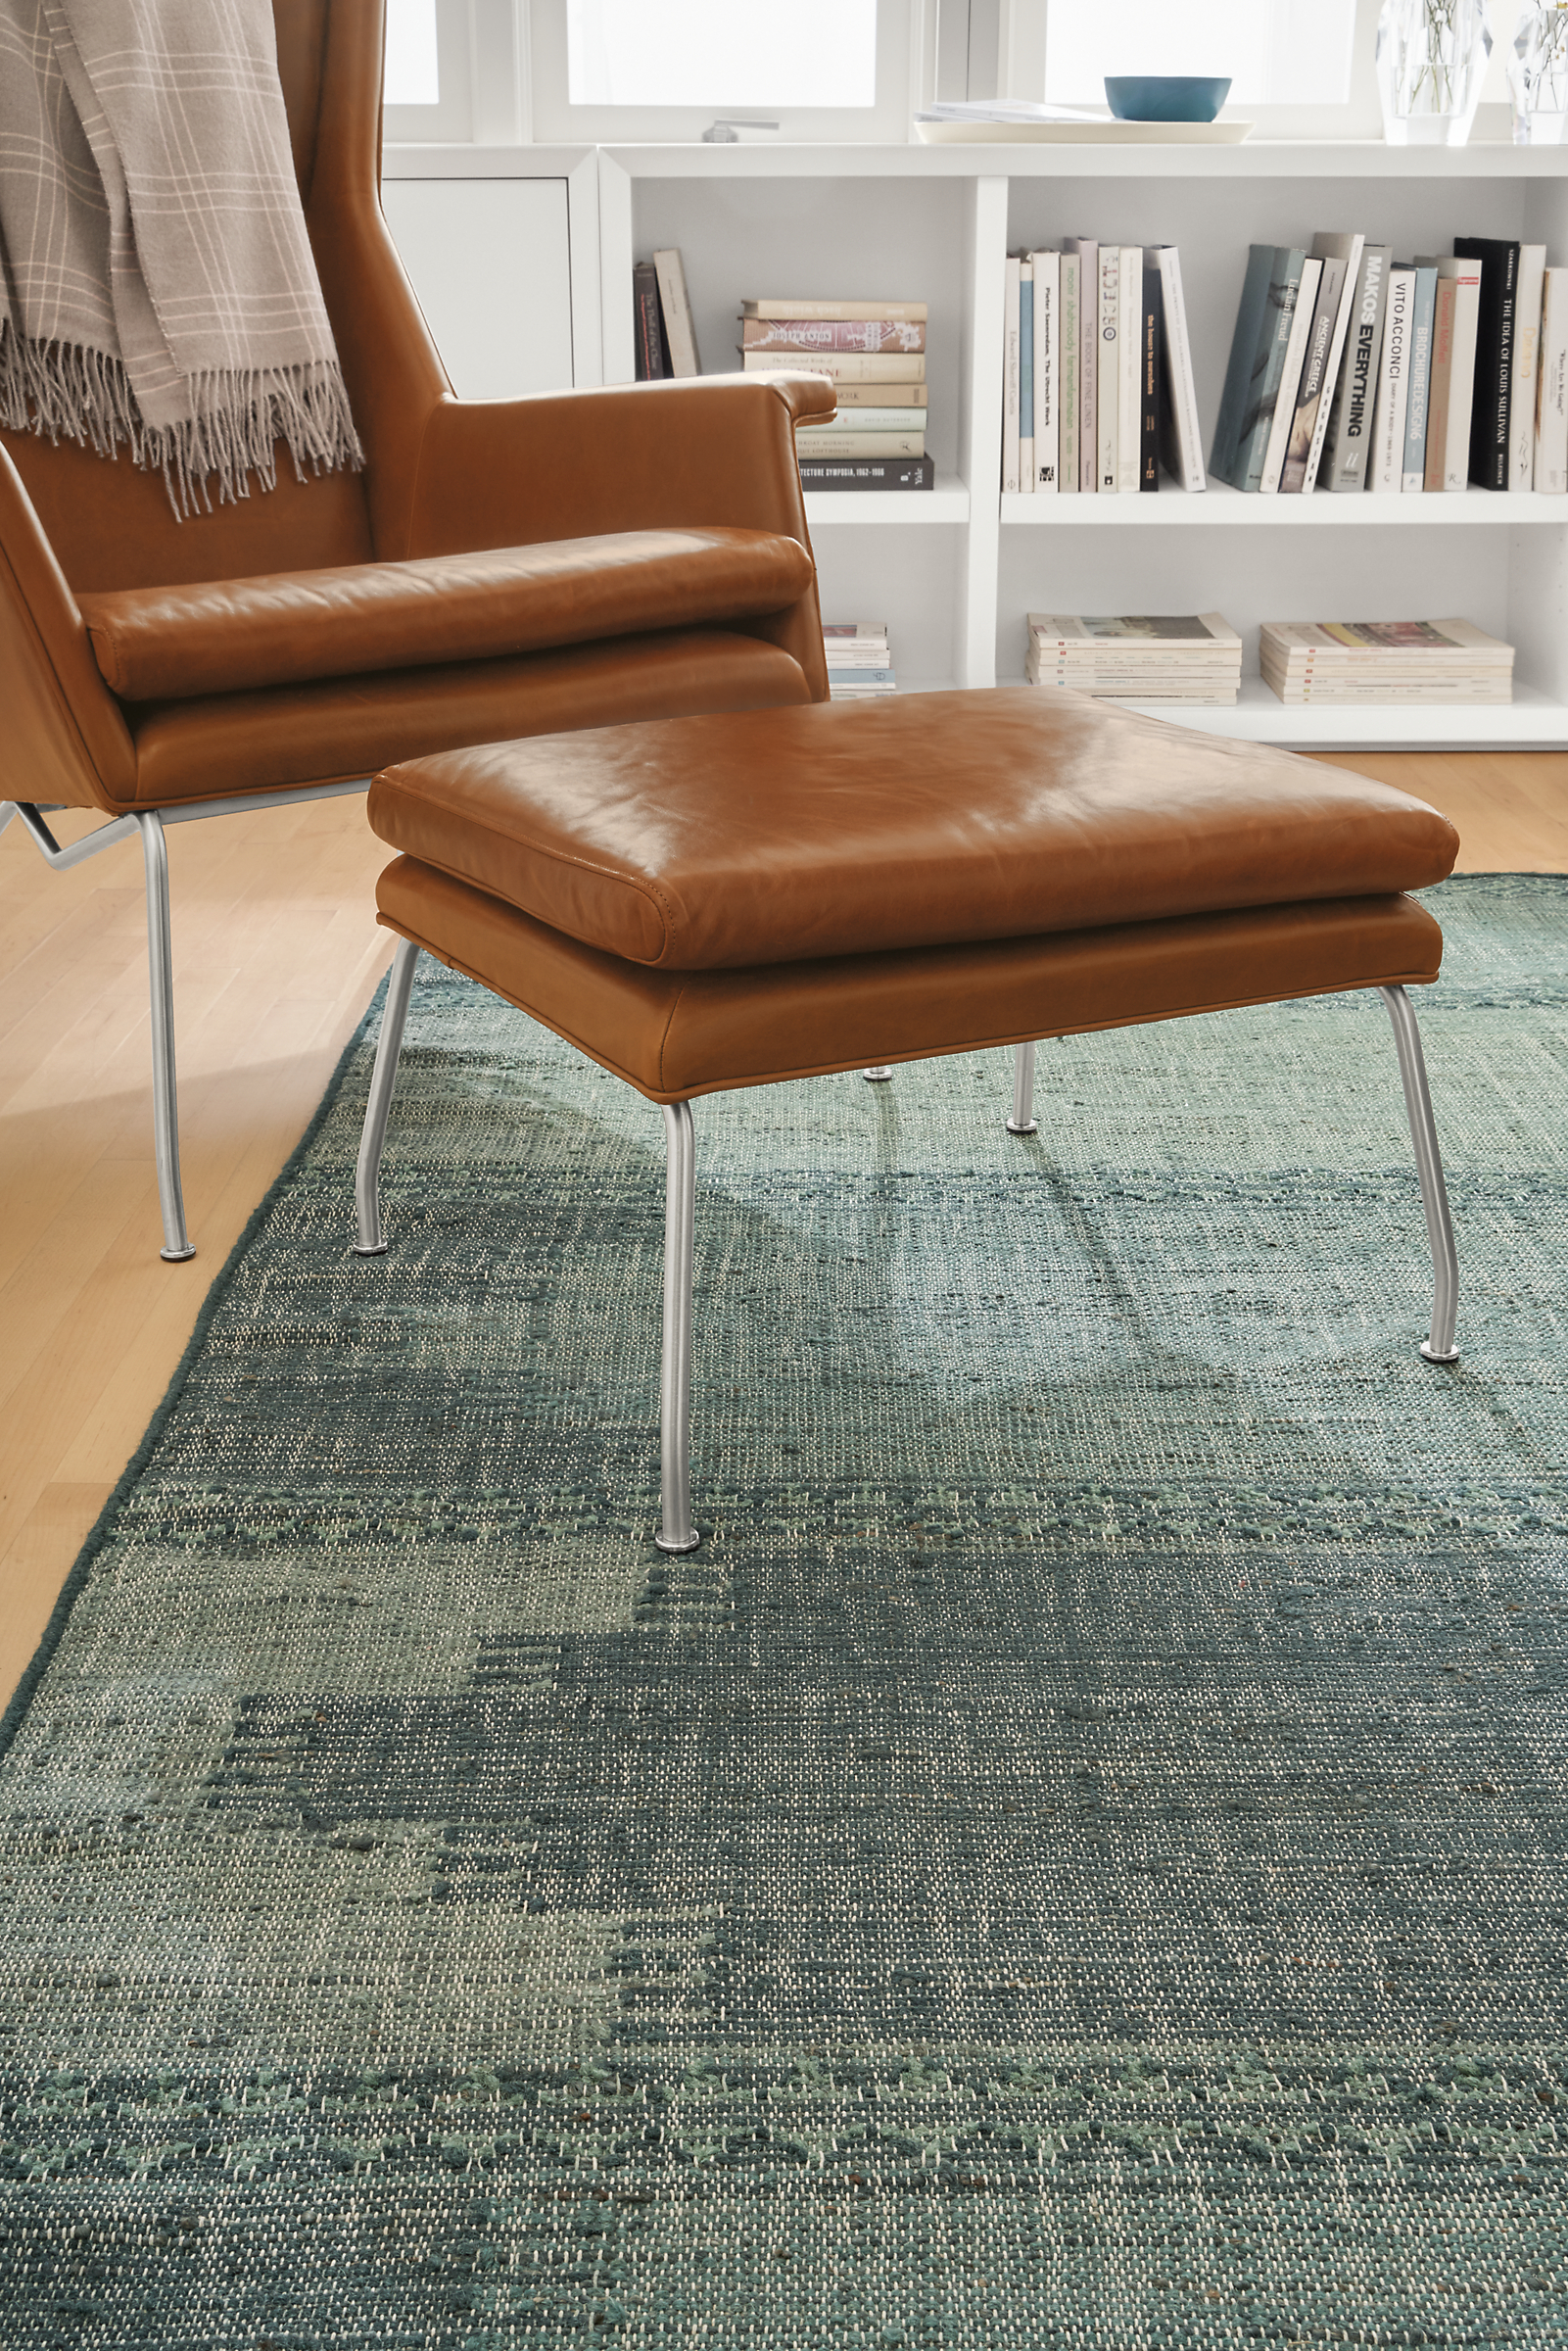 Detail of Avata rug in Turquoise in living room with Aidan leather chair.